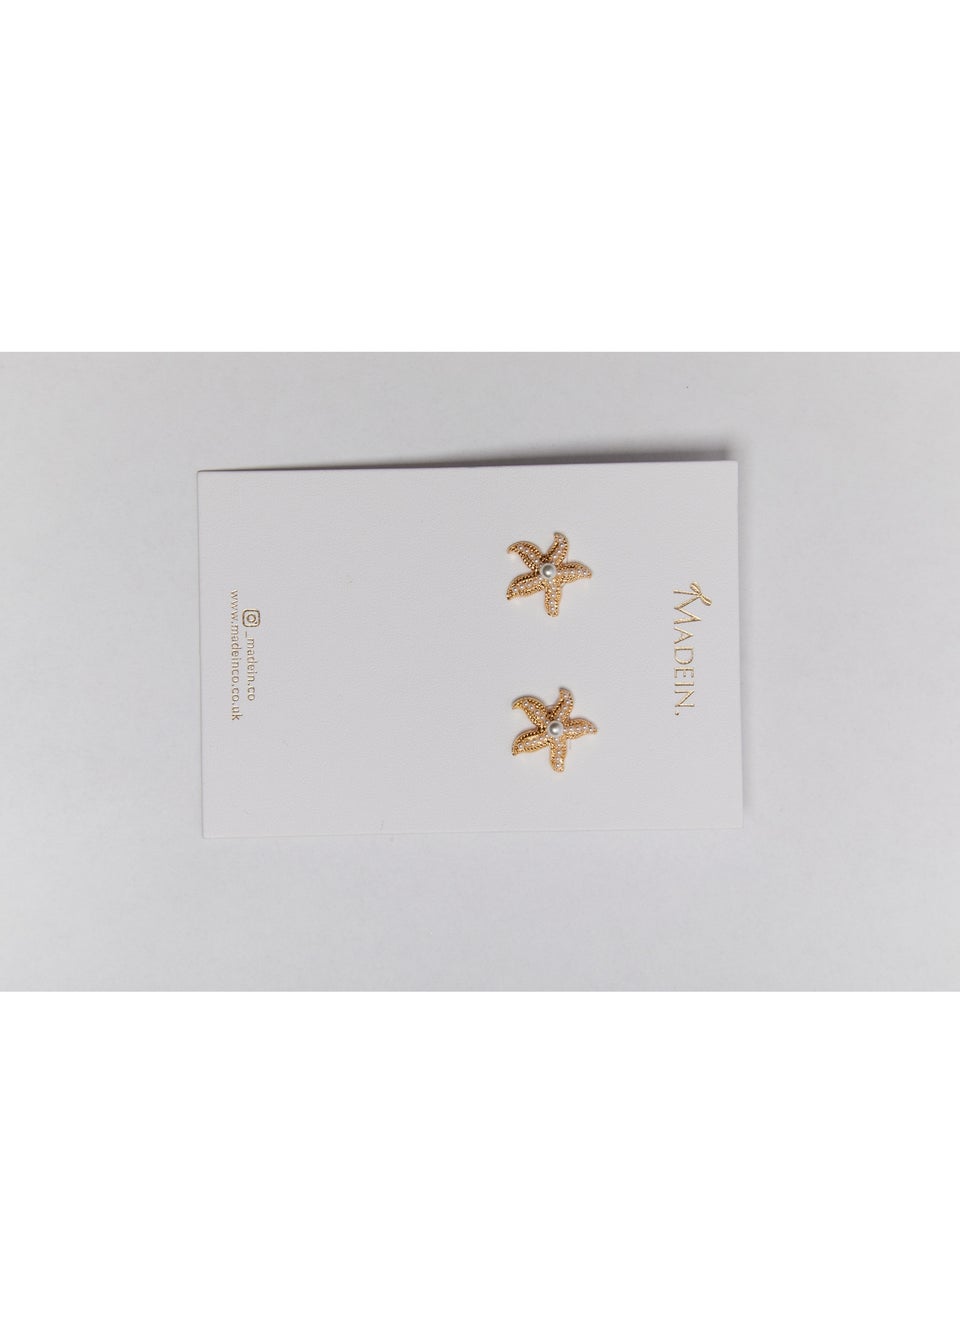 Madein Pearl Embellished Gold Starfish Earrings